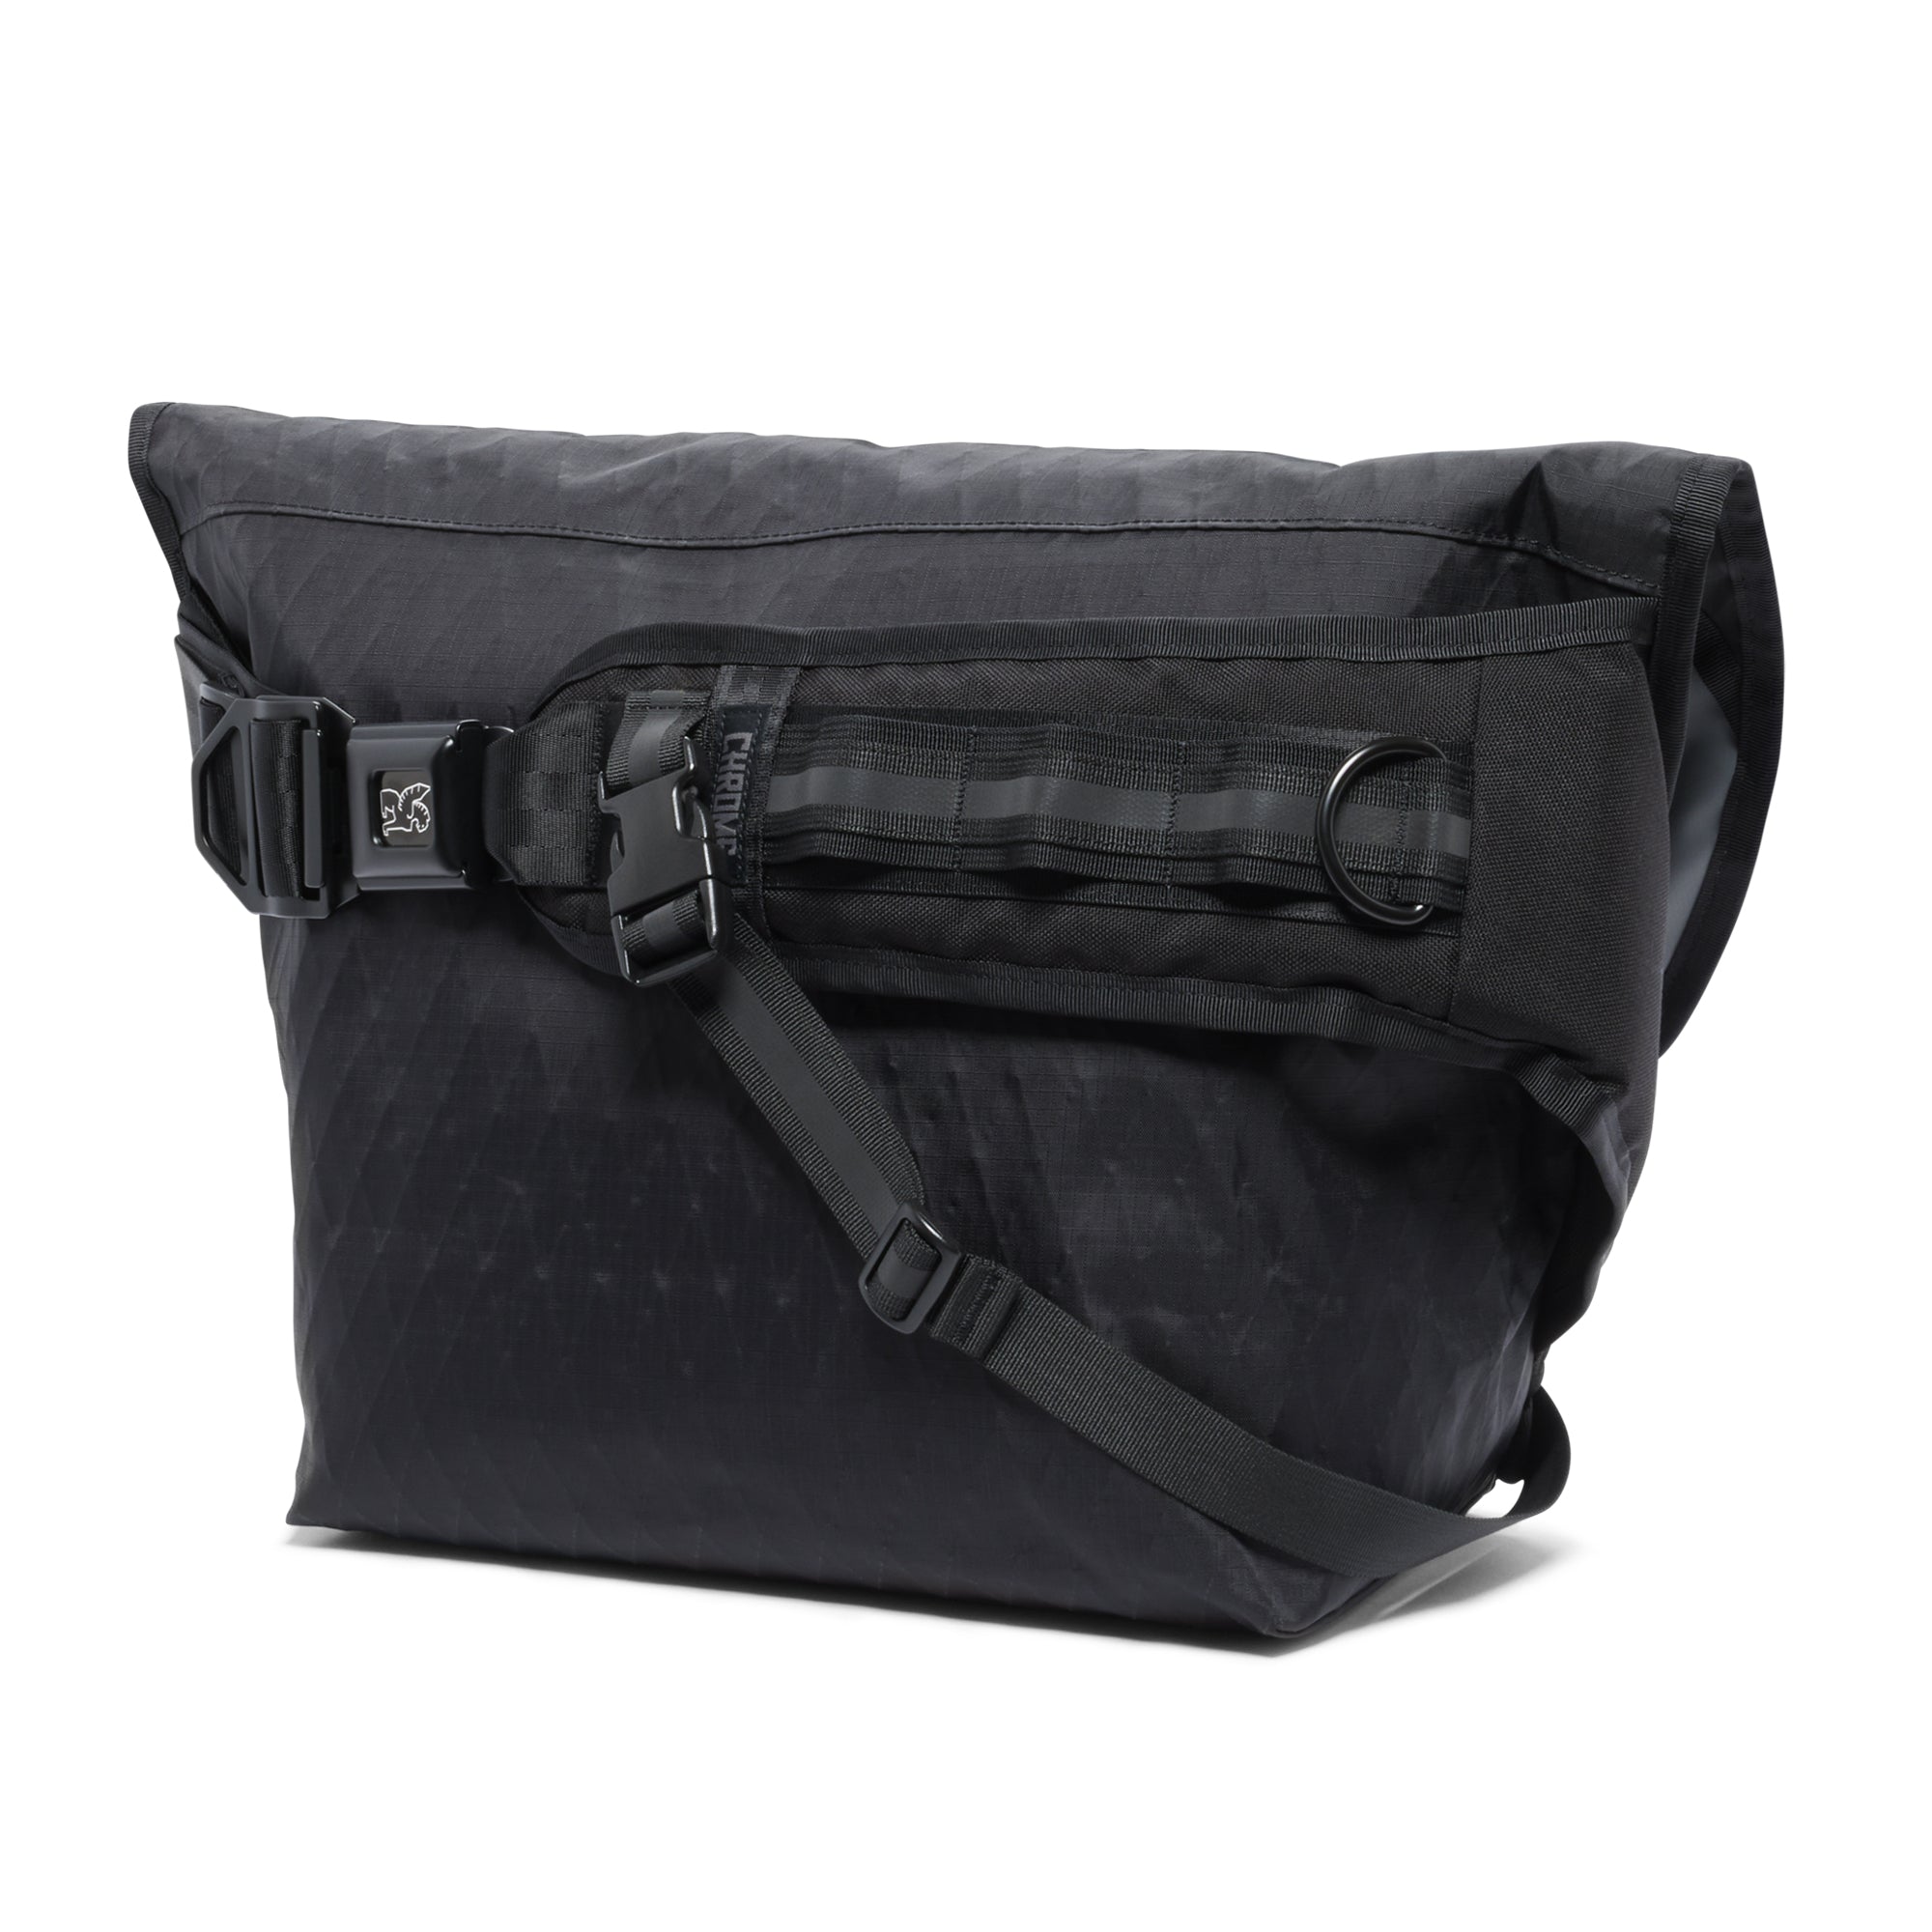 20L Messenger in new black XRF fabric strap view #color_black xrf